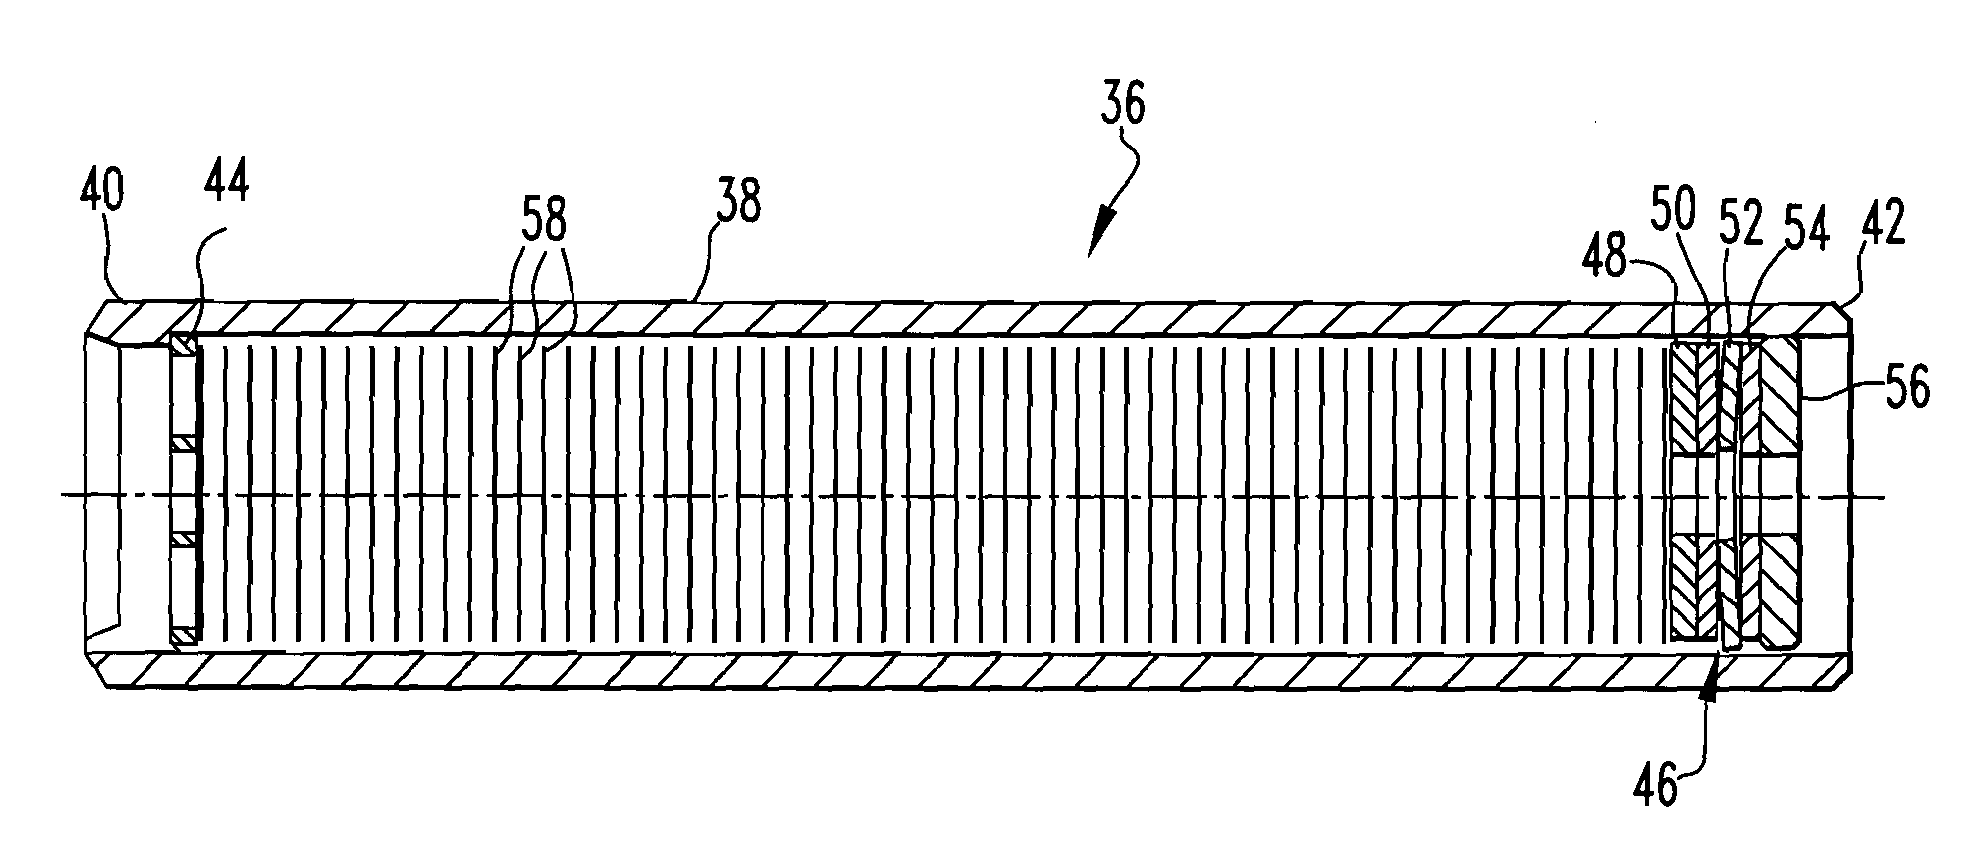 Noise and vibration mitigation system for nuclear reactors employing an acoustic side branch resonator